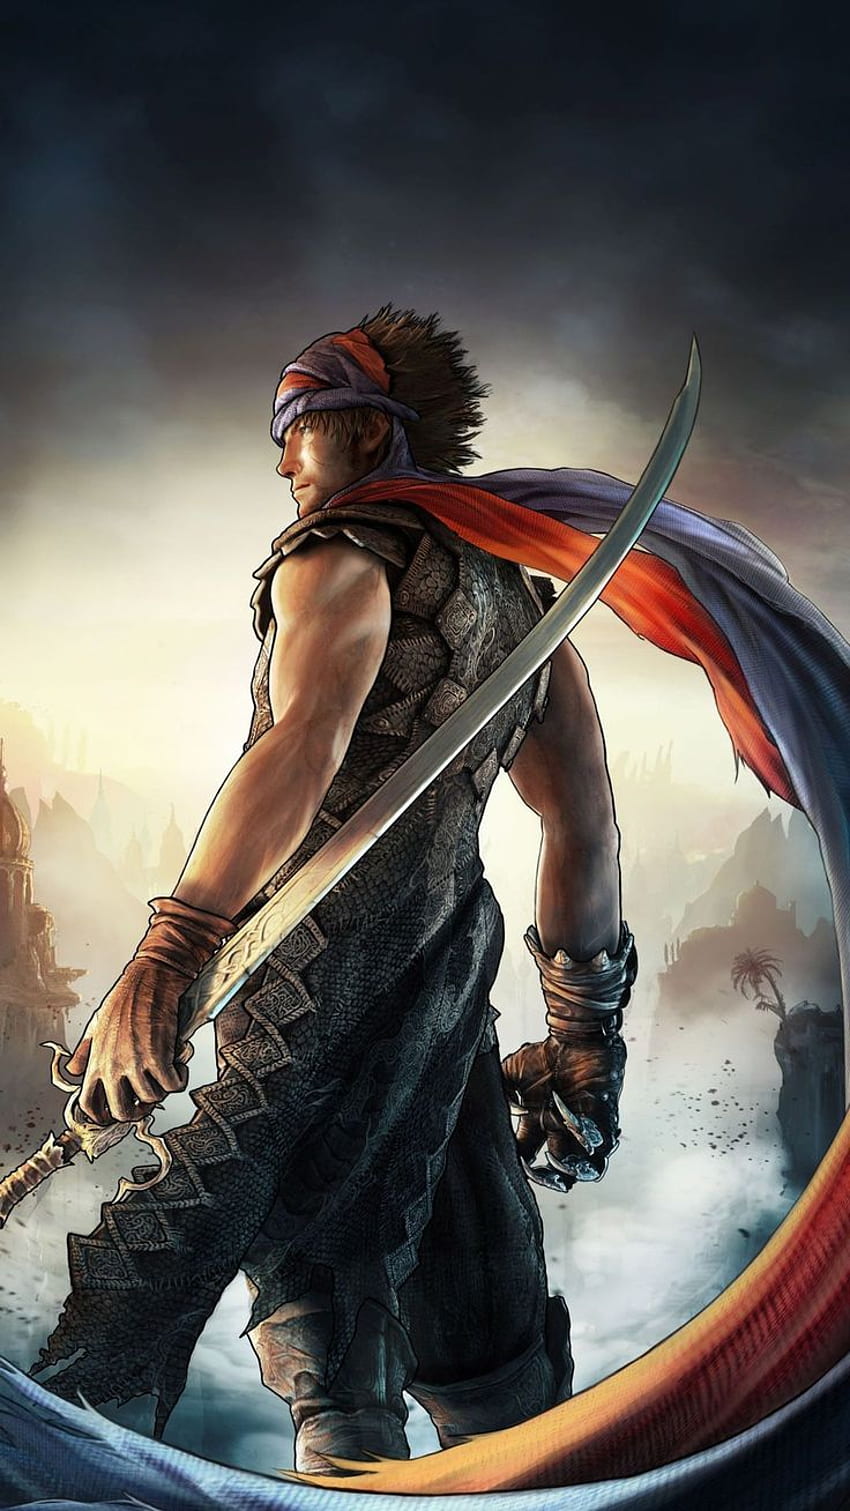 Prince of Persia Mobile Background. Prince of persia, android, Persia, Prince of Persia iPhone HD phone wallpaper